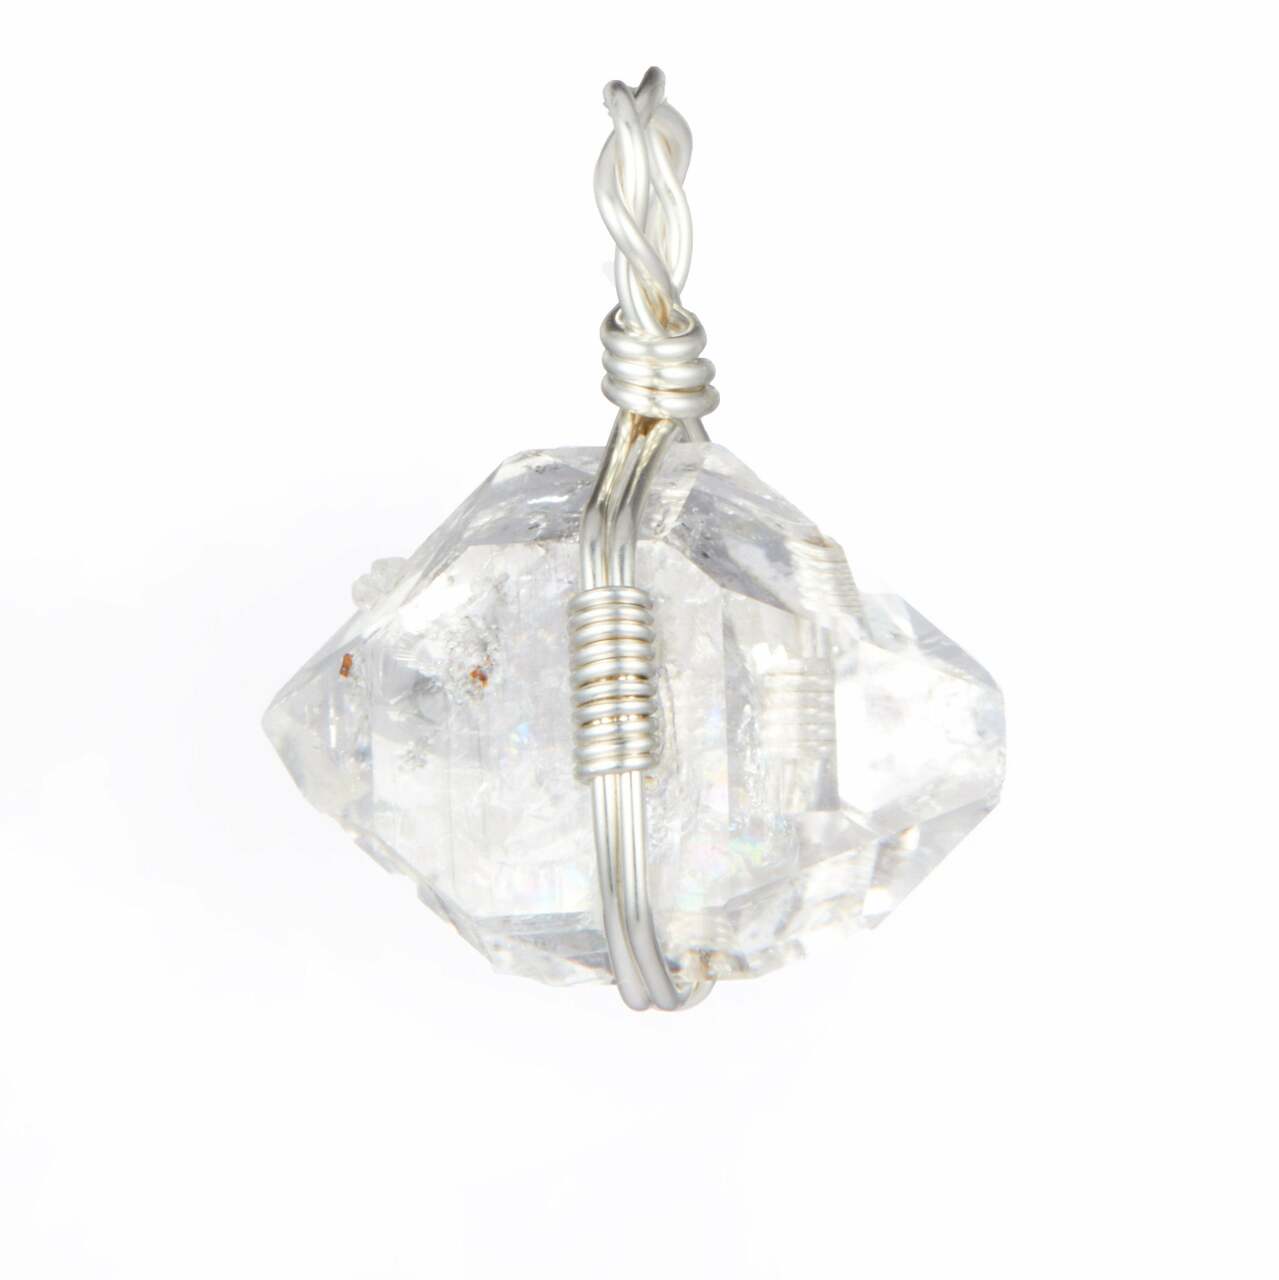 Herkimer Diamond Meaning and Properties